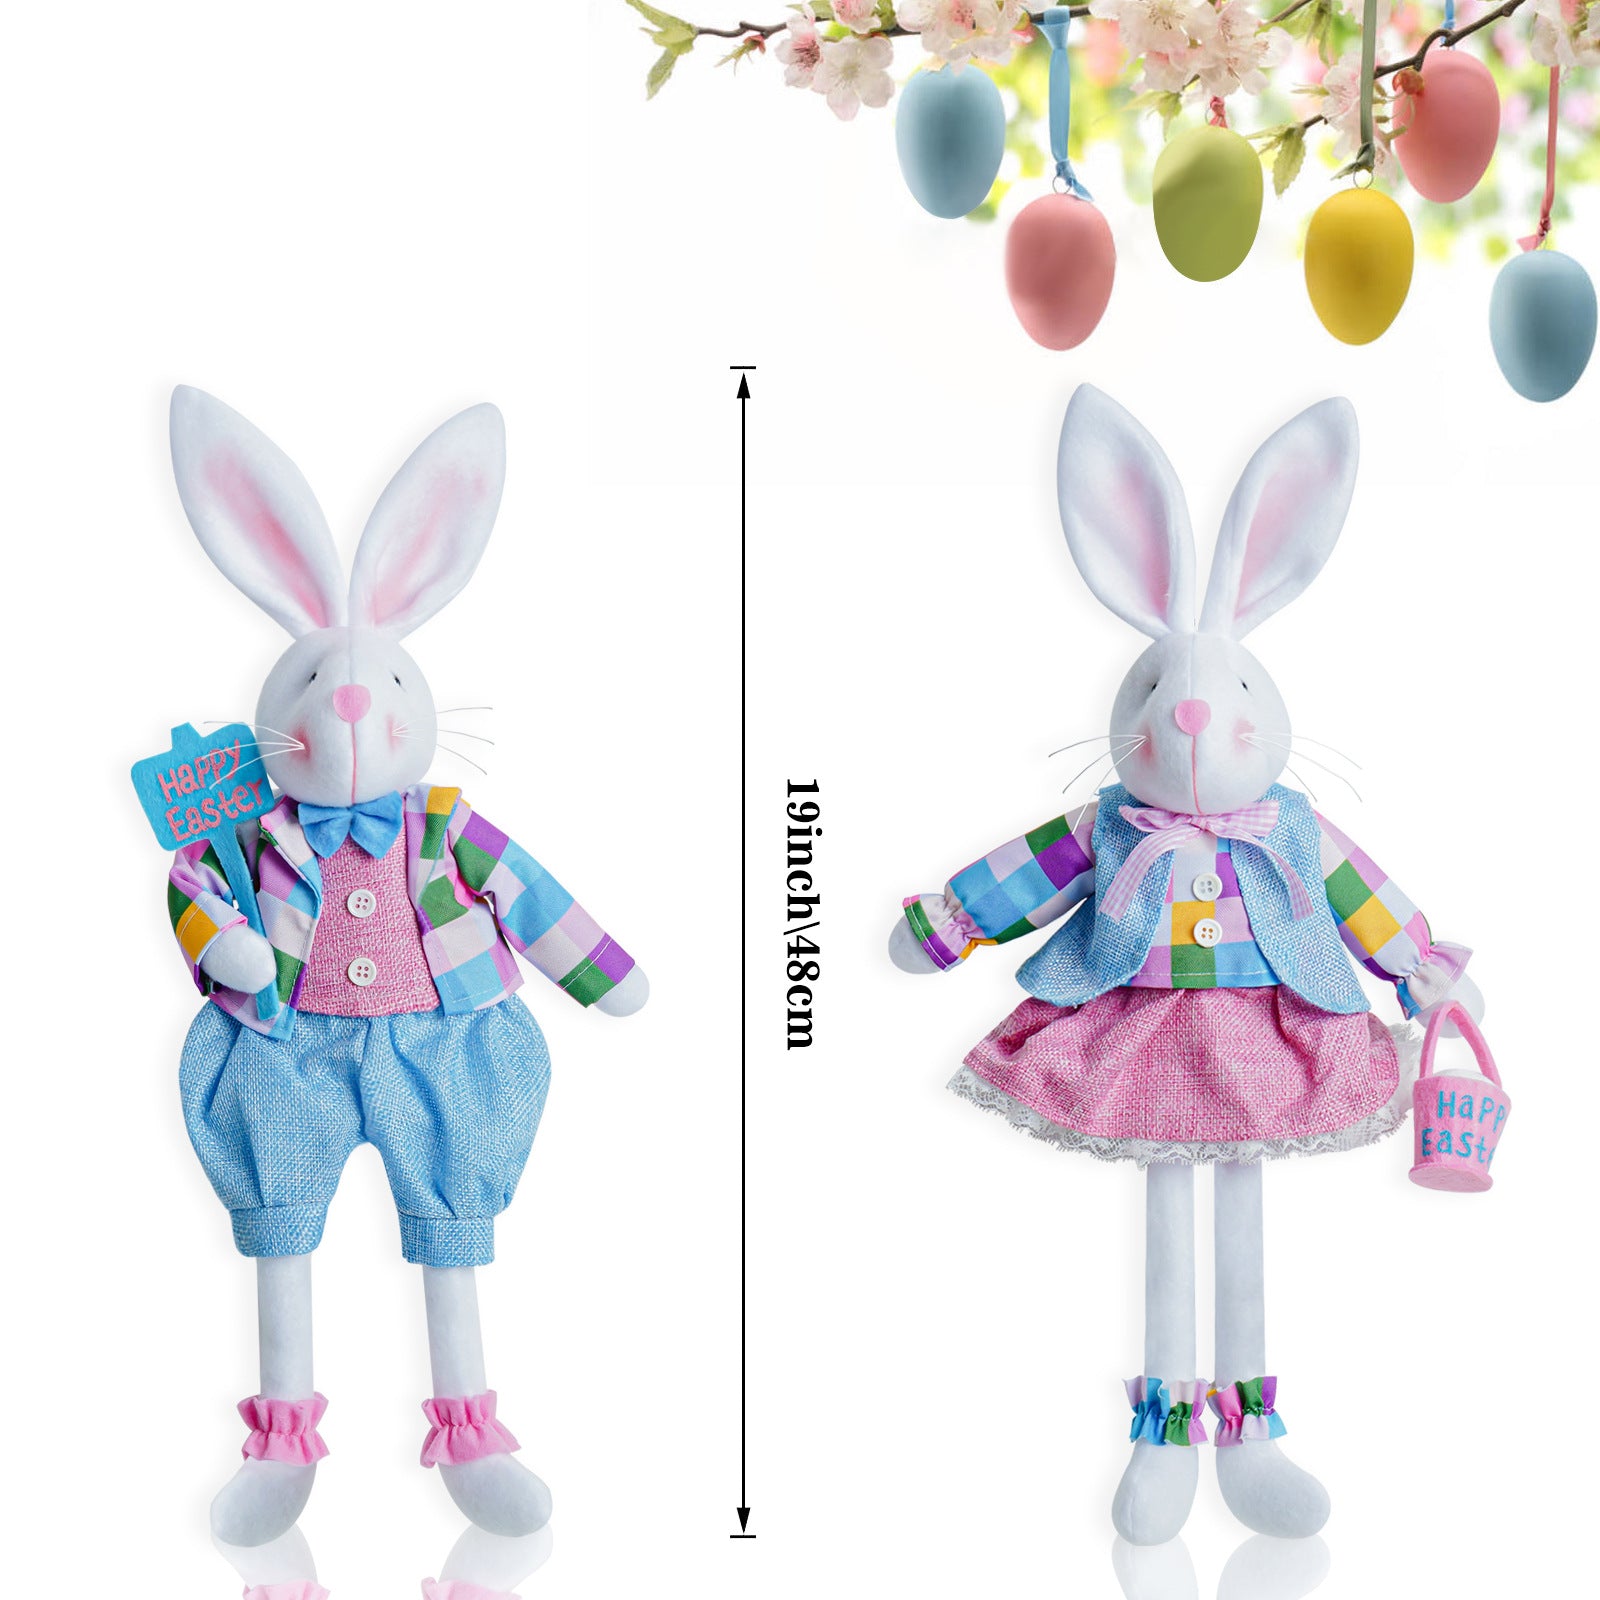 Easter colorful sitting bunny gnomes